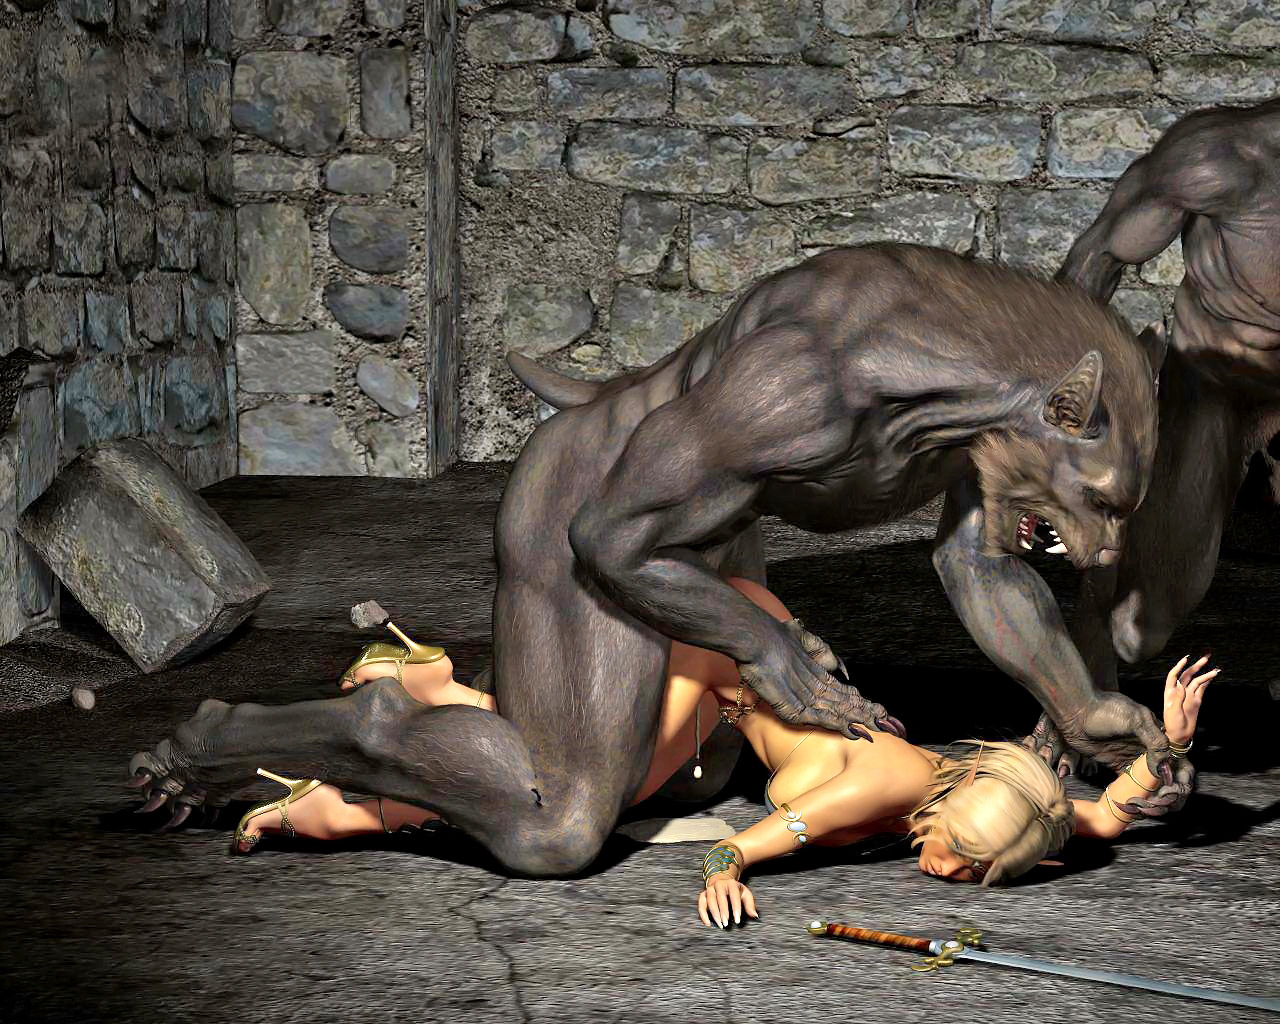 Hot Anal Sex Animated - Brutally buttfucked by werewolves â€“ 3D RPG animation anal sex at  Hd3dMonsterSex.com